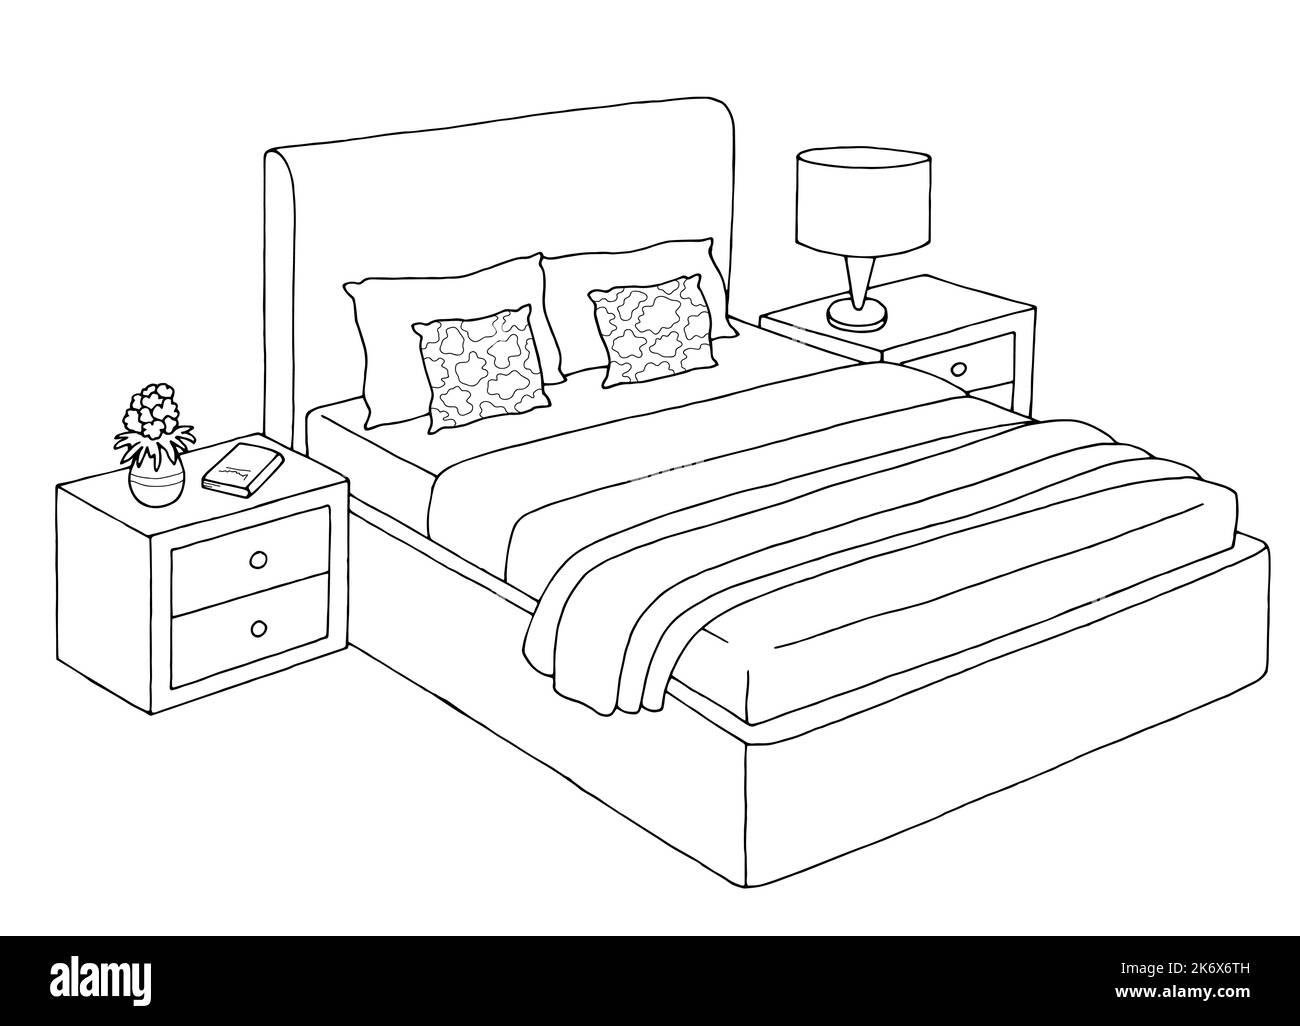 Bedroom graphic black white isolated furniture sketch illustration ...